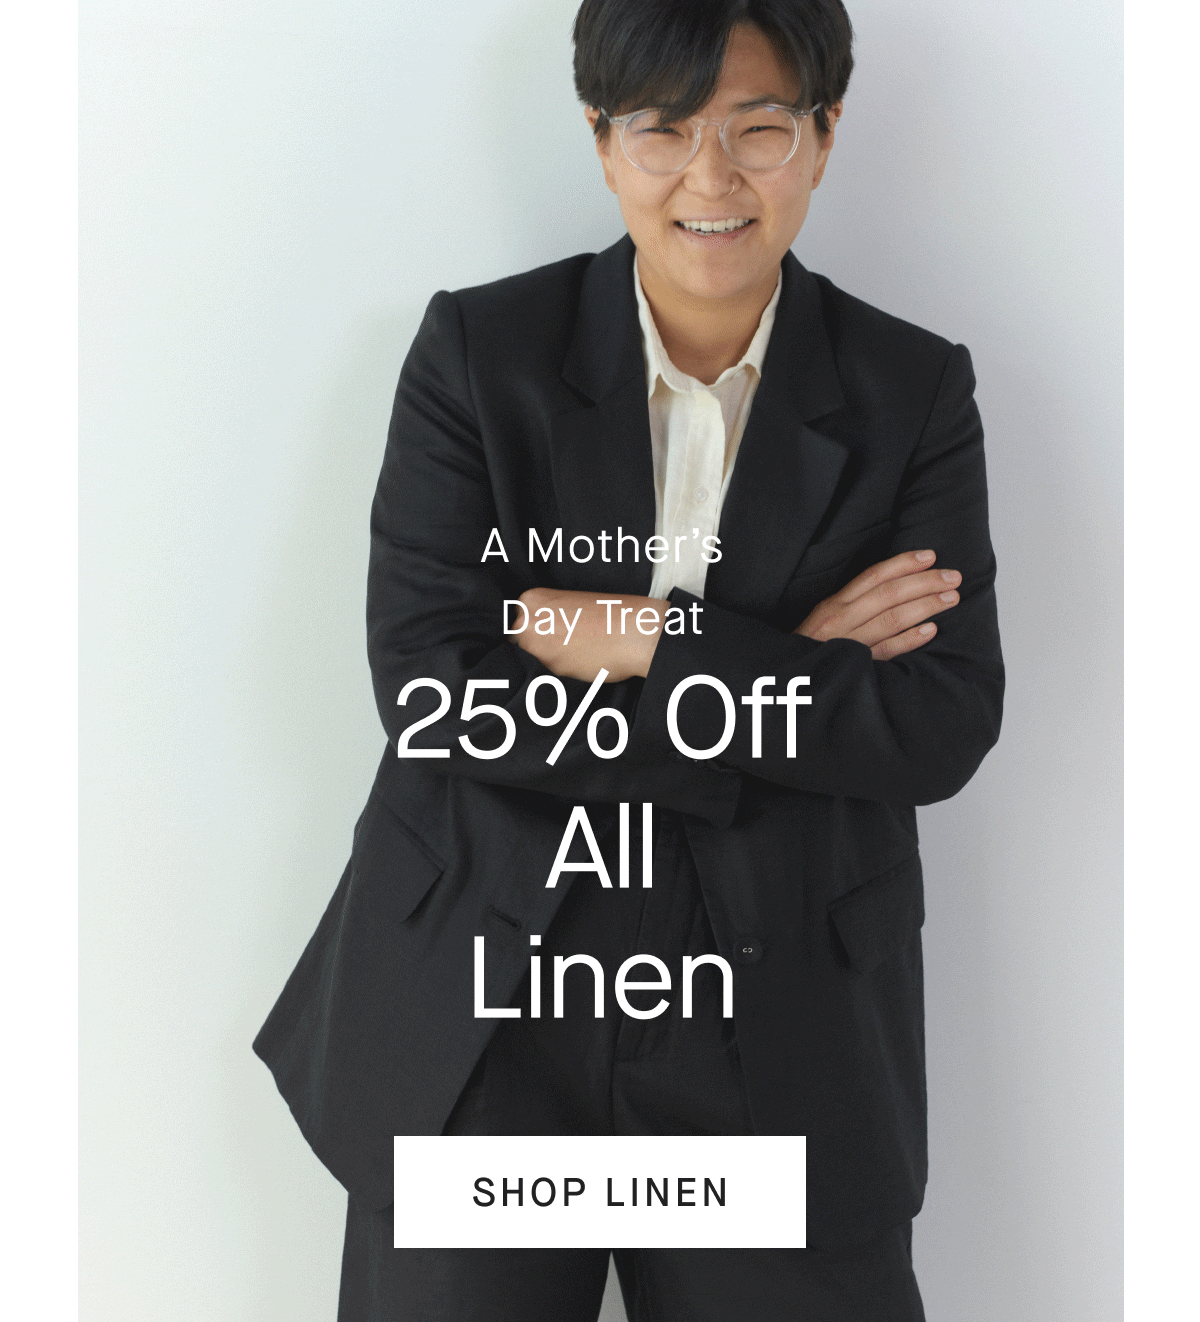 A Mother's Day Treat 25% Off All Linen [IMAGE][SHOP LINEN]